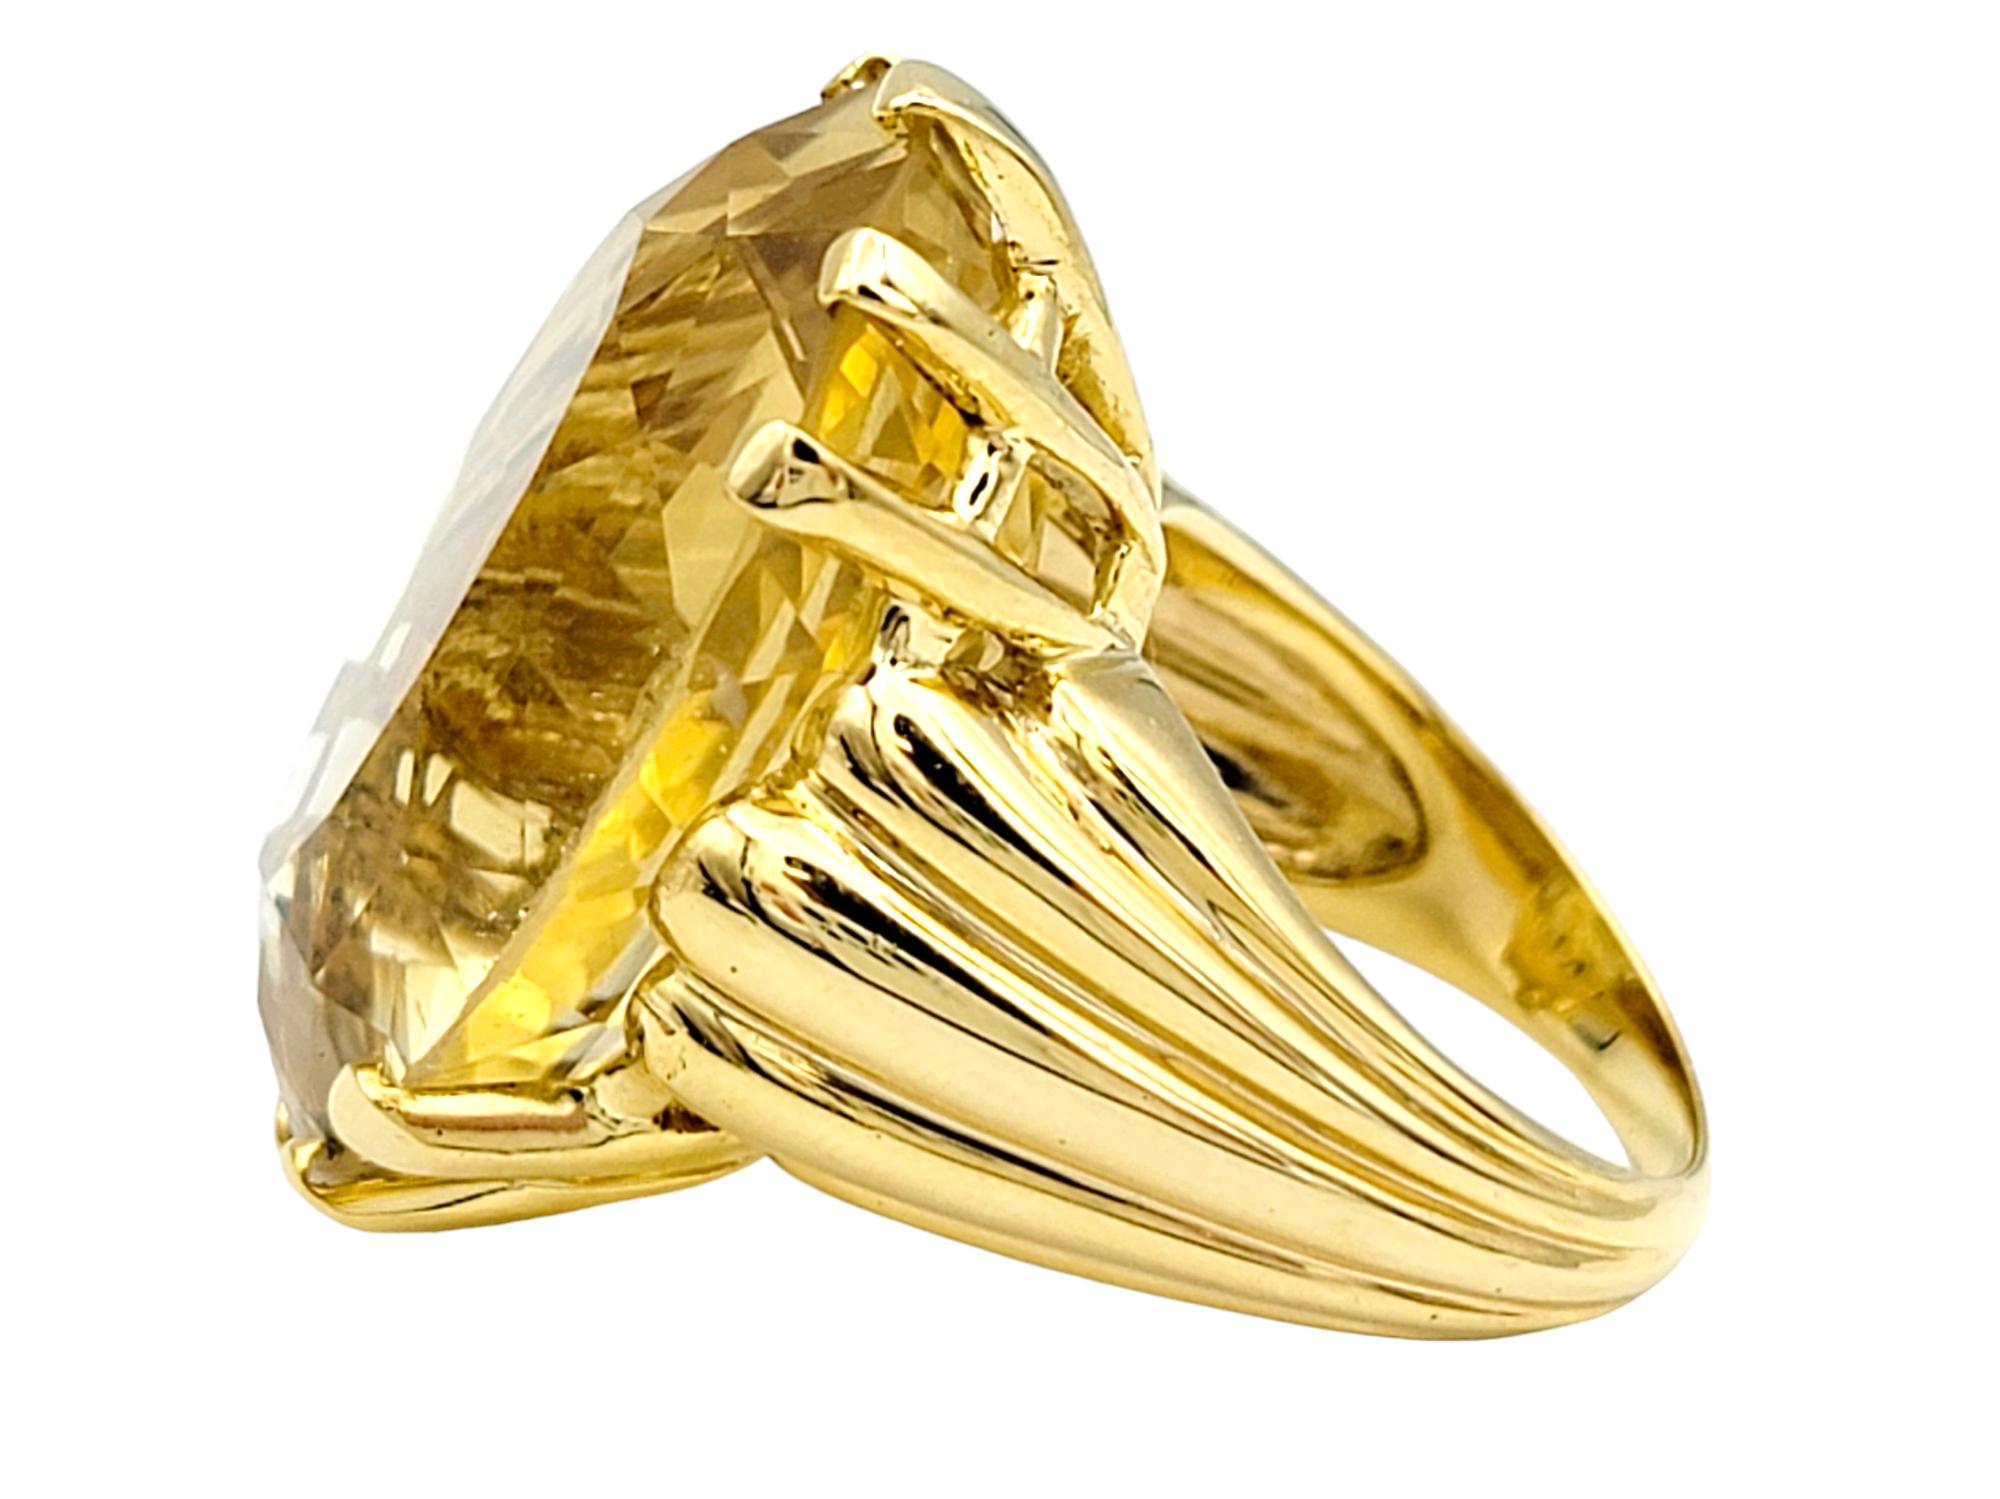 Oval Cut Huge 29.25 Carat Oval Citrine Solitaire Cocktail Ring in 14 Karat Yellow Gold For Sale